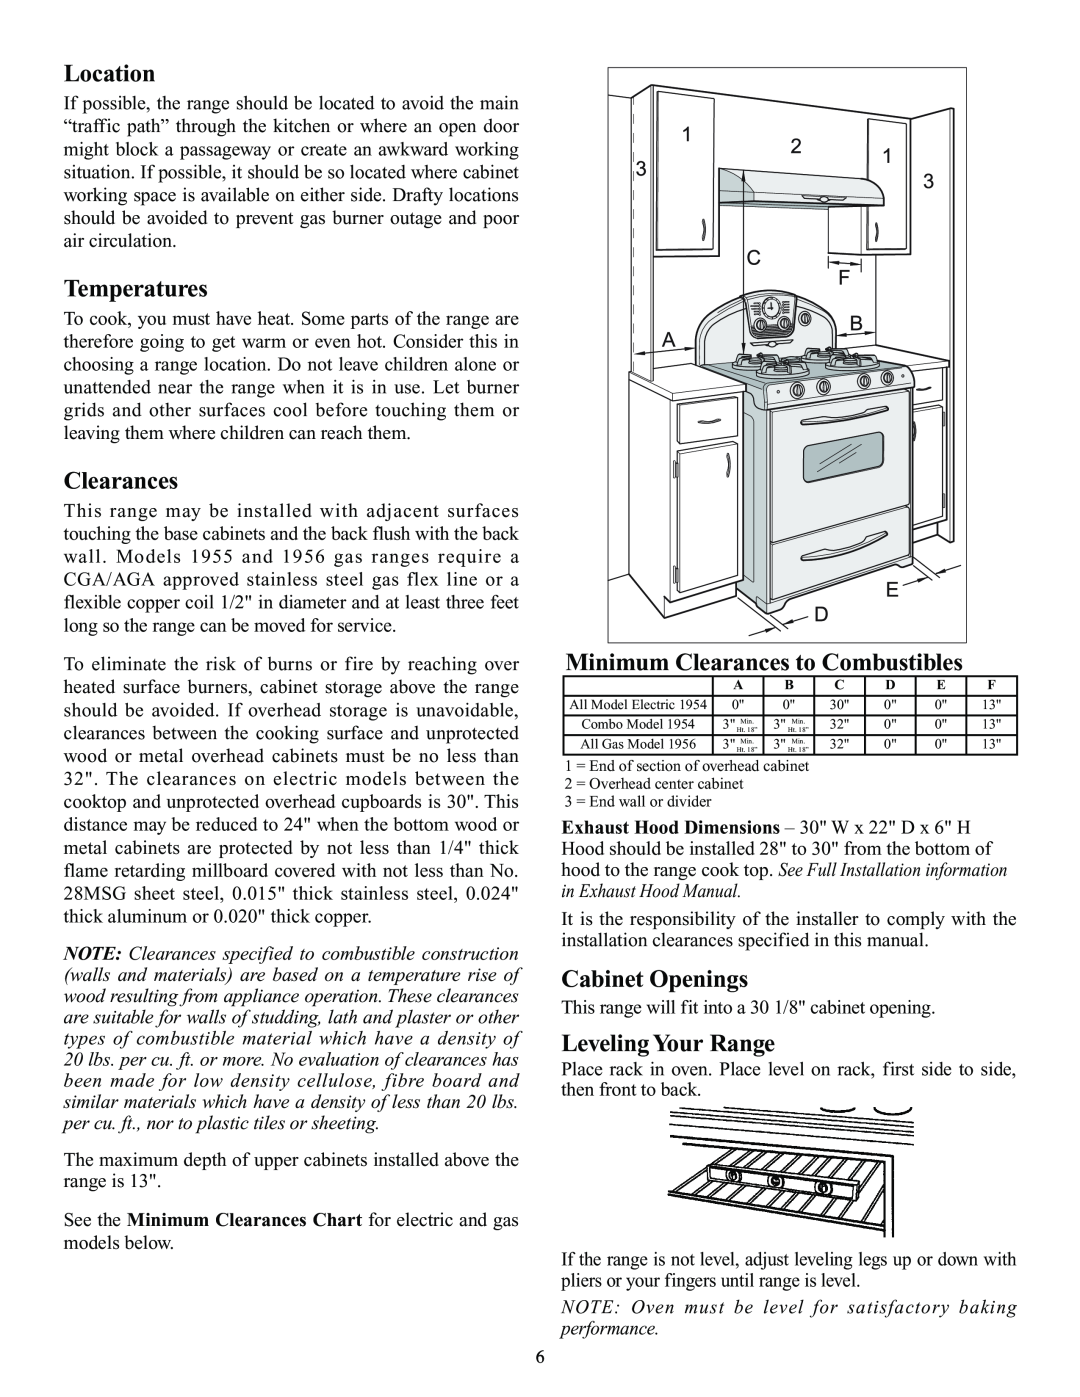 Elmira Stove Works 1954 manual Location, Temperatures, Minimum Clearances to Combustibles, Cabinet Openings 